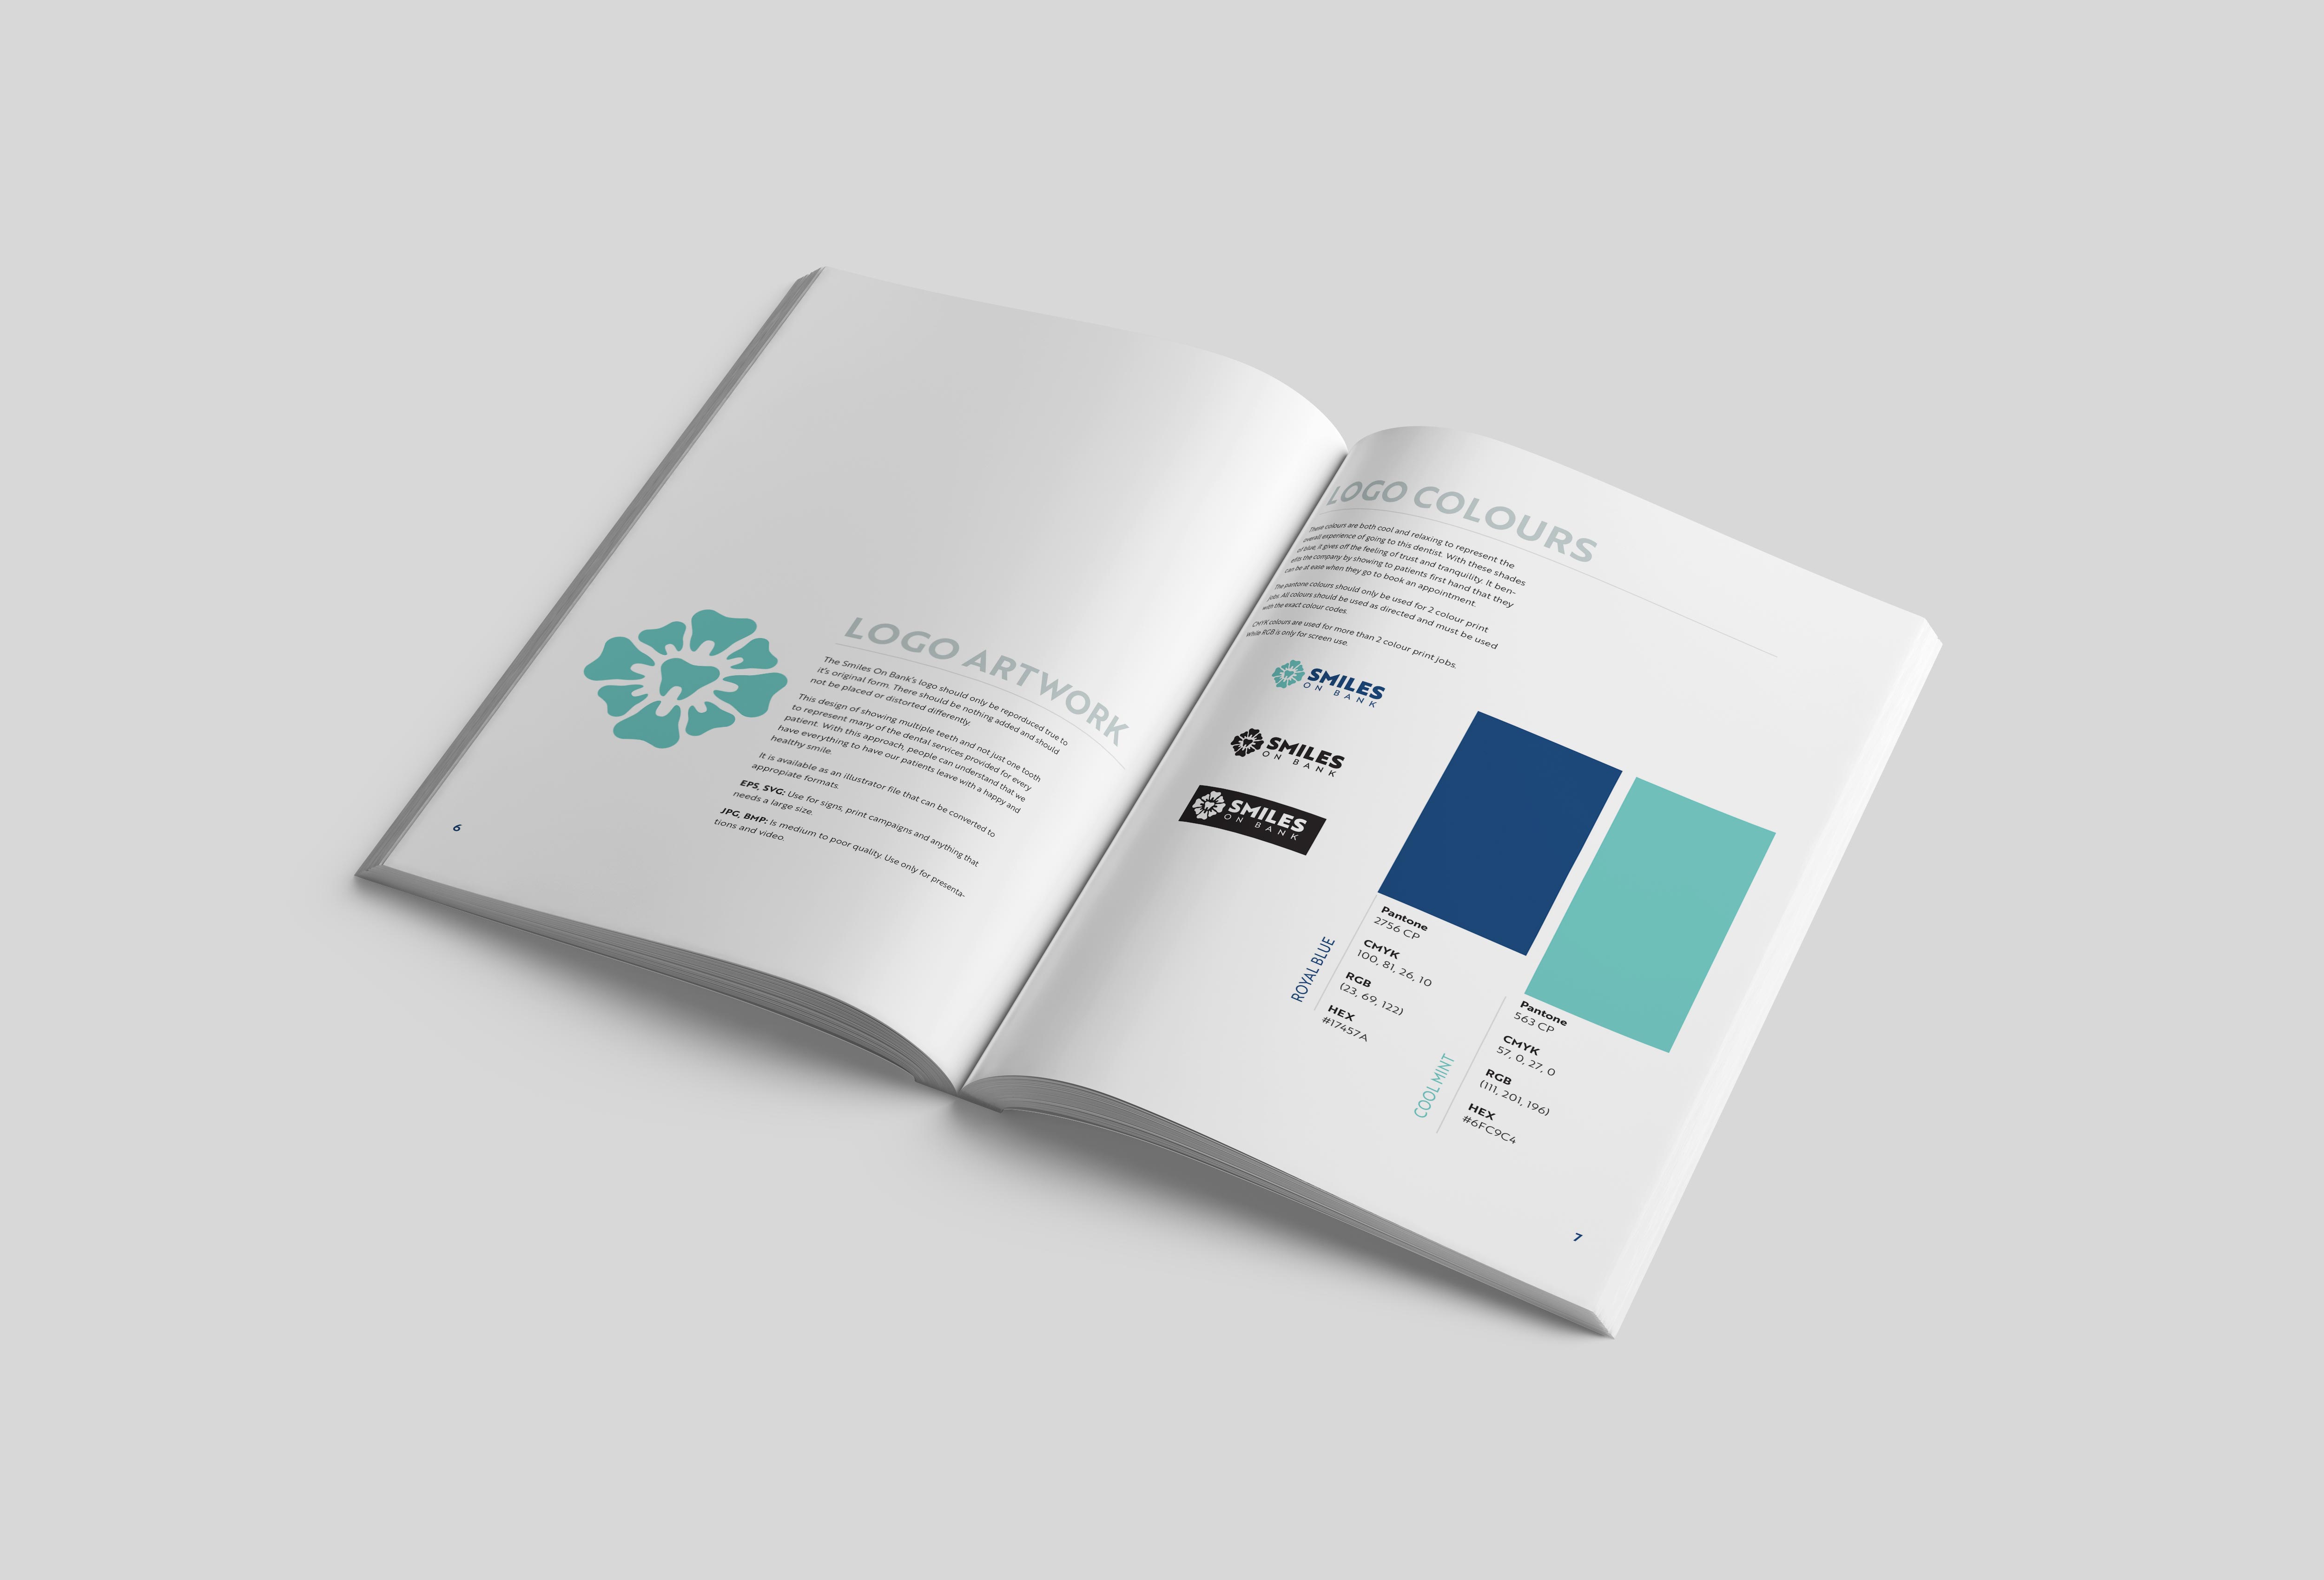 Branding guidelines mockup showing the logo uses and typeface